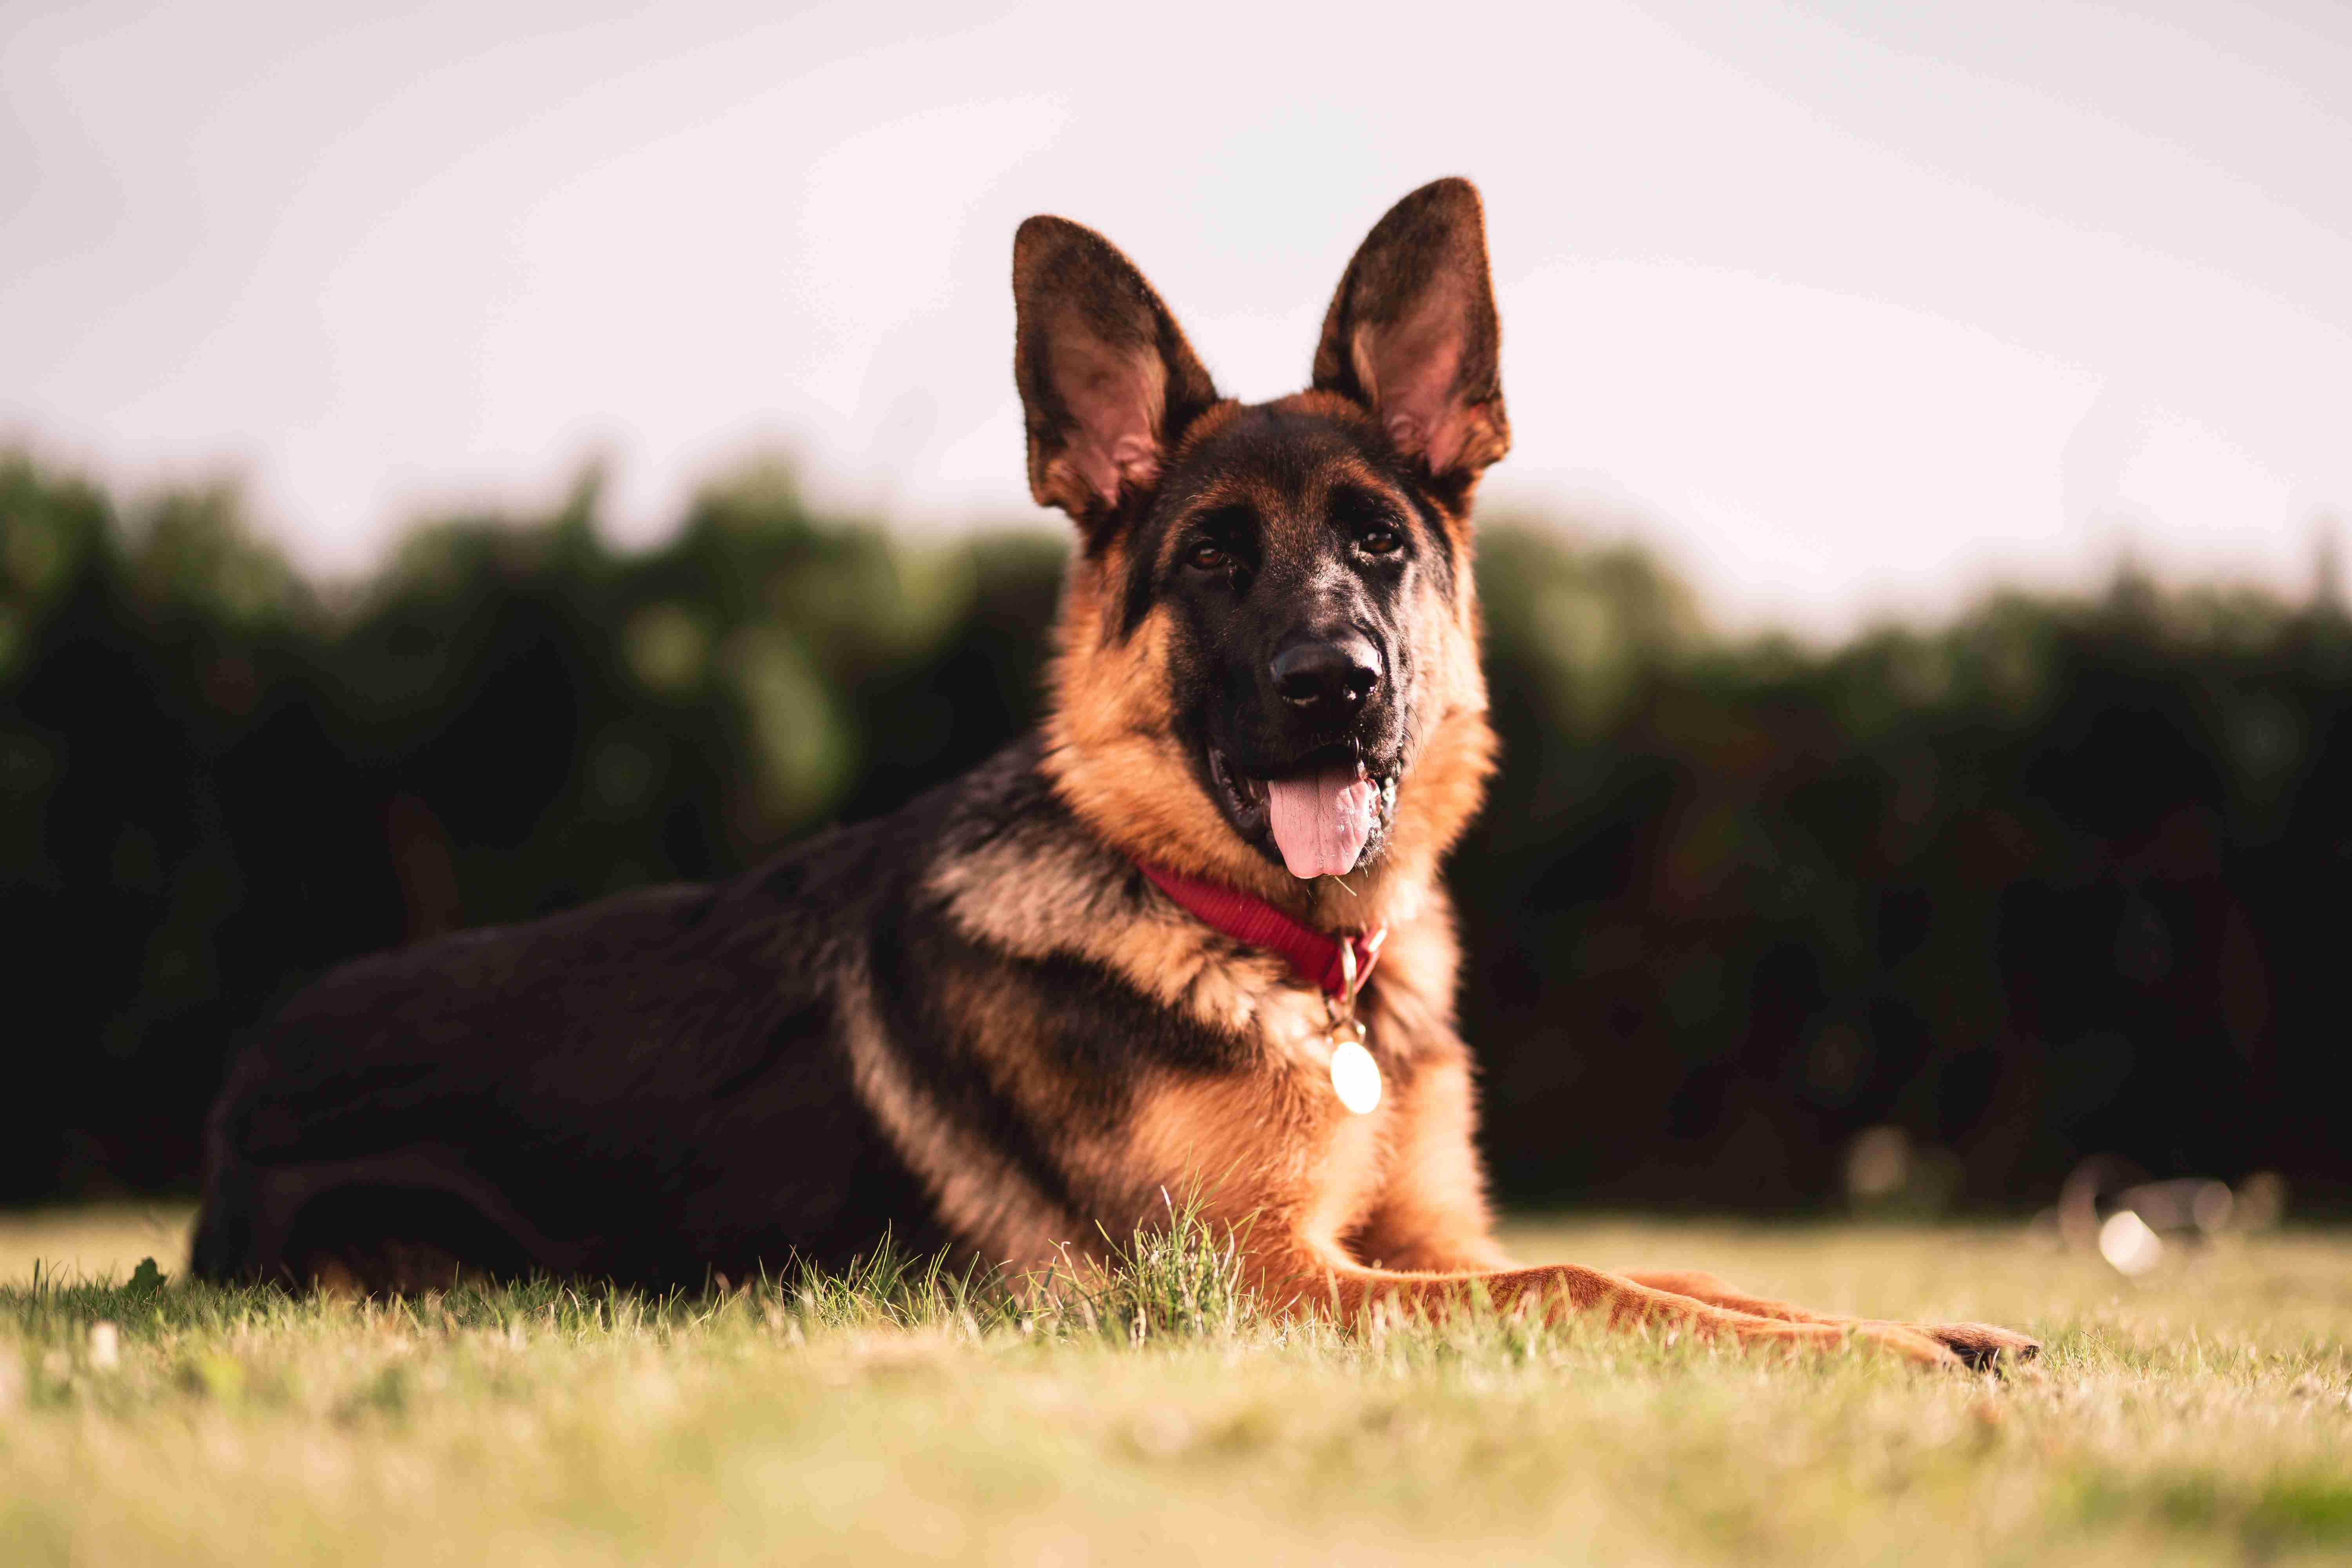 What is the best way to introduce a German shepherd to a new baby in the household?